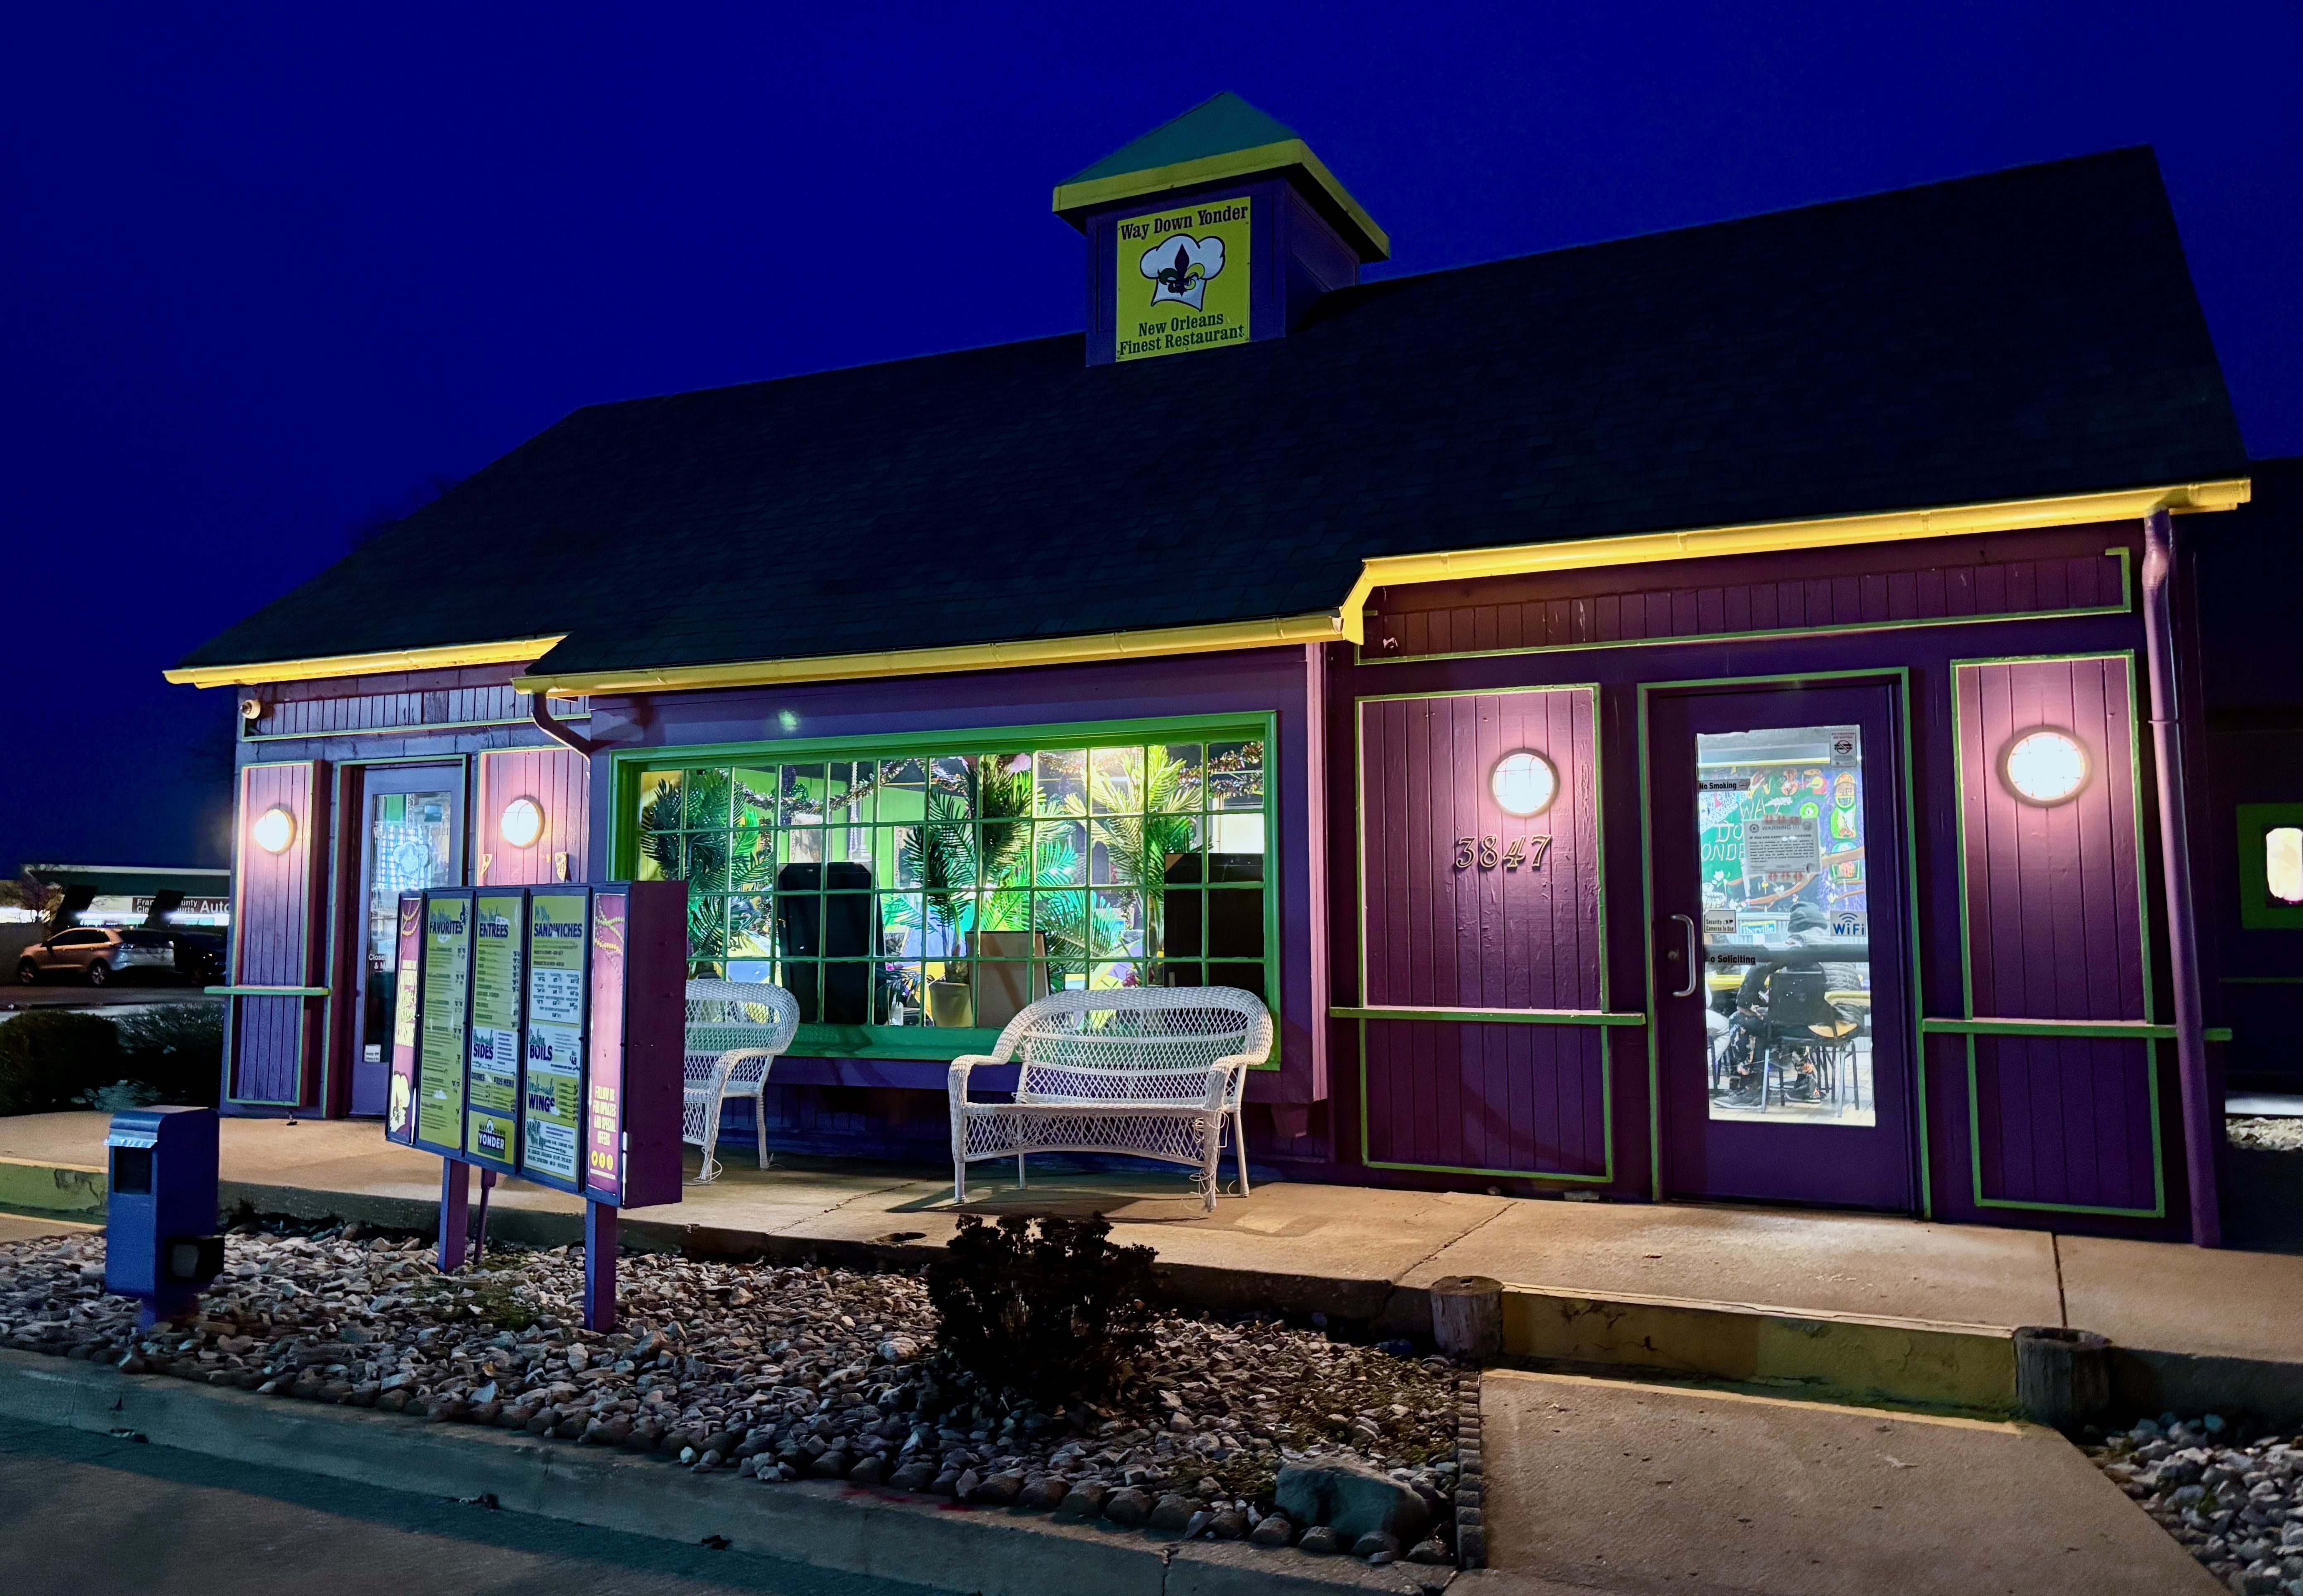 The exterior of Way Down Yonder at night, painted in purple and yellow